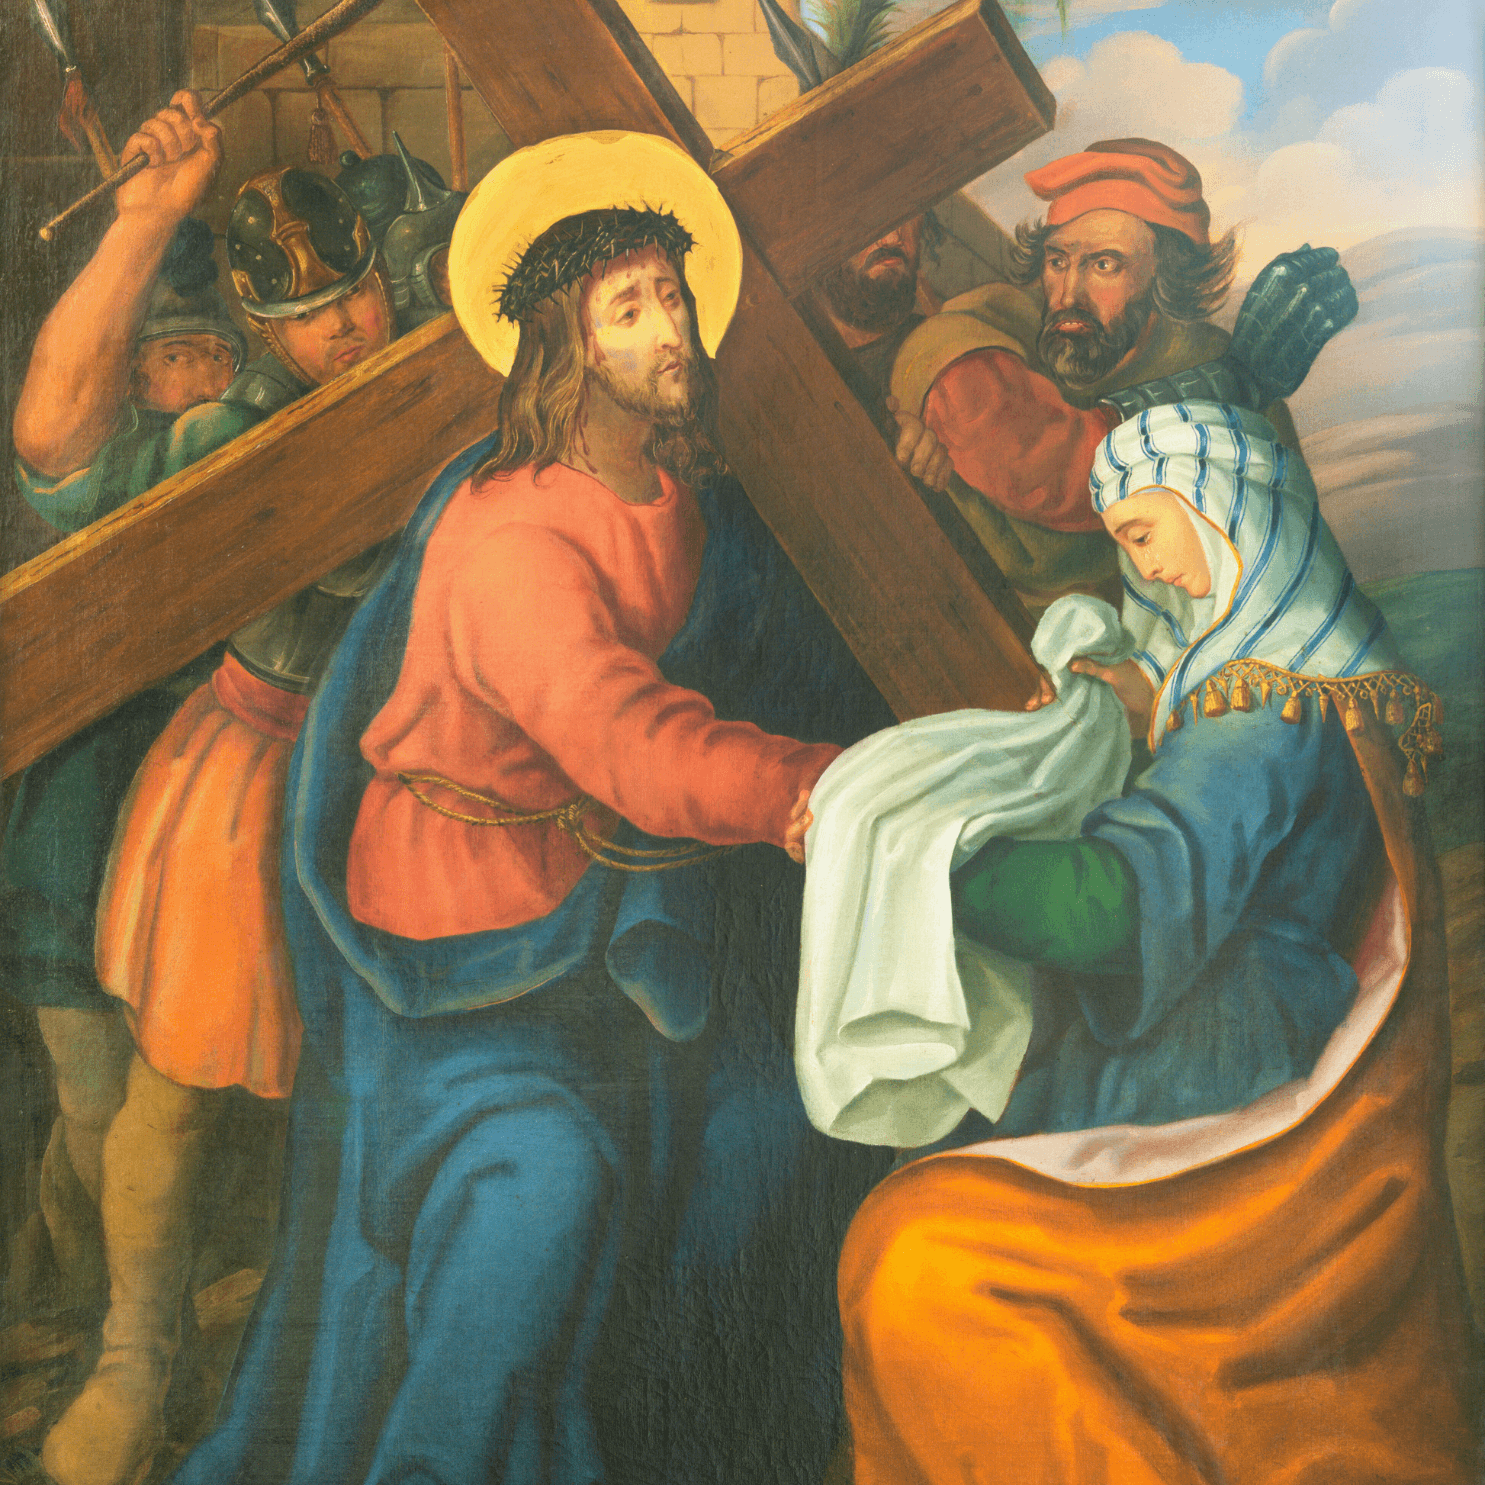 The Way of the Cross Sixth Station: Veronica Wipes the Face of Jesus